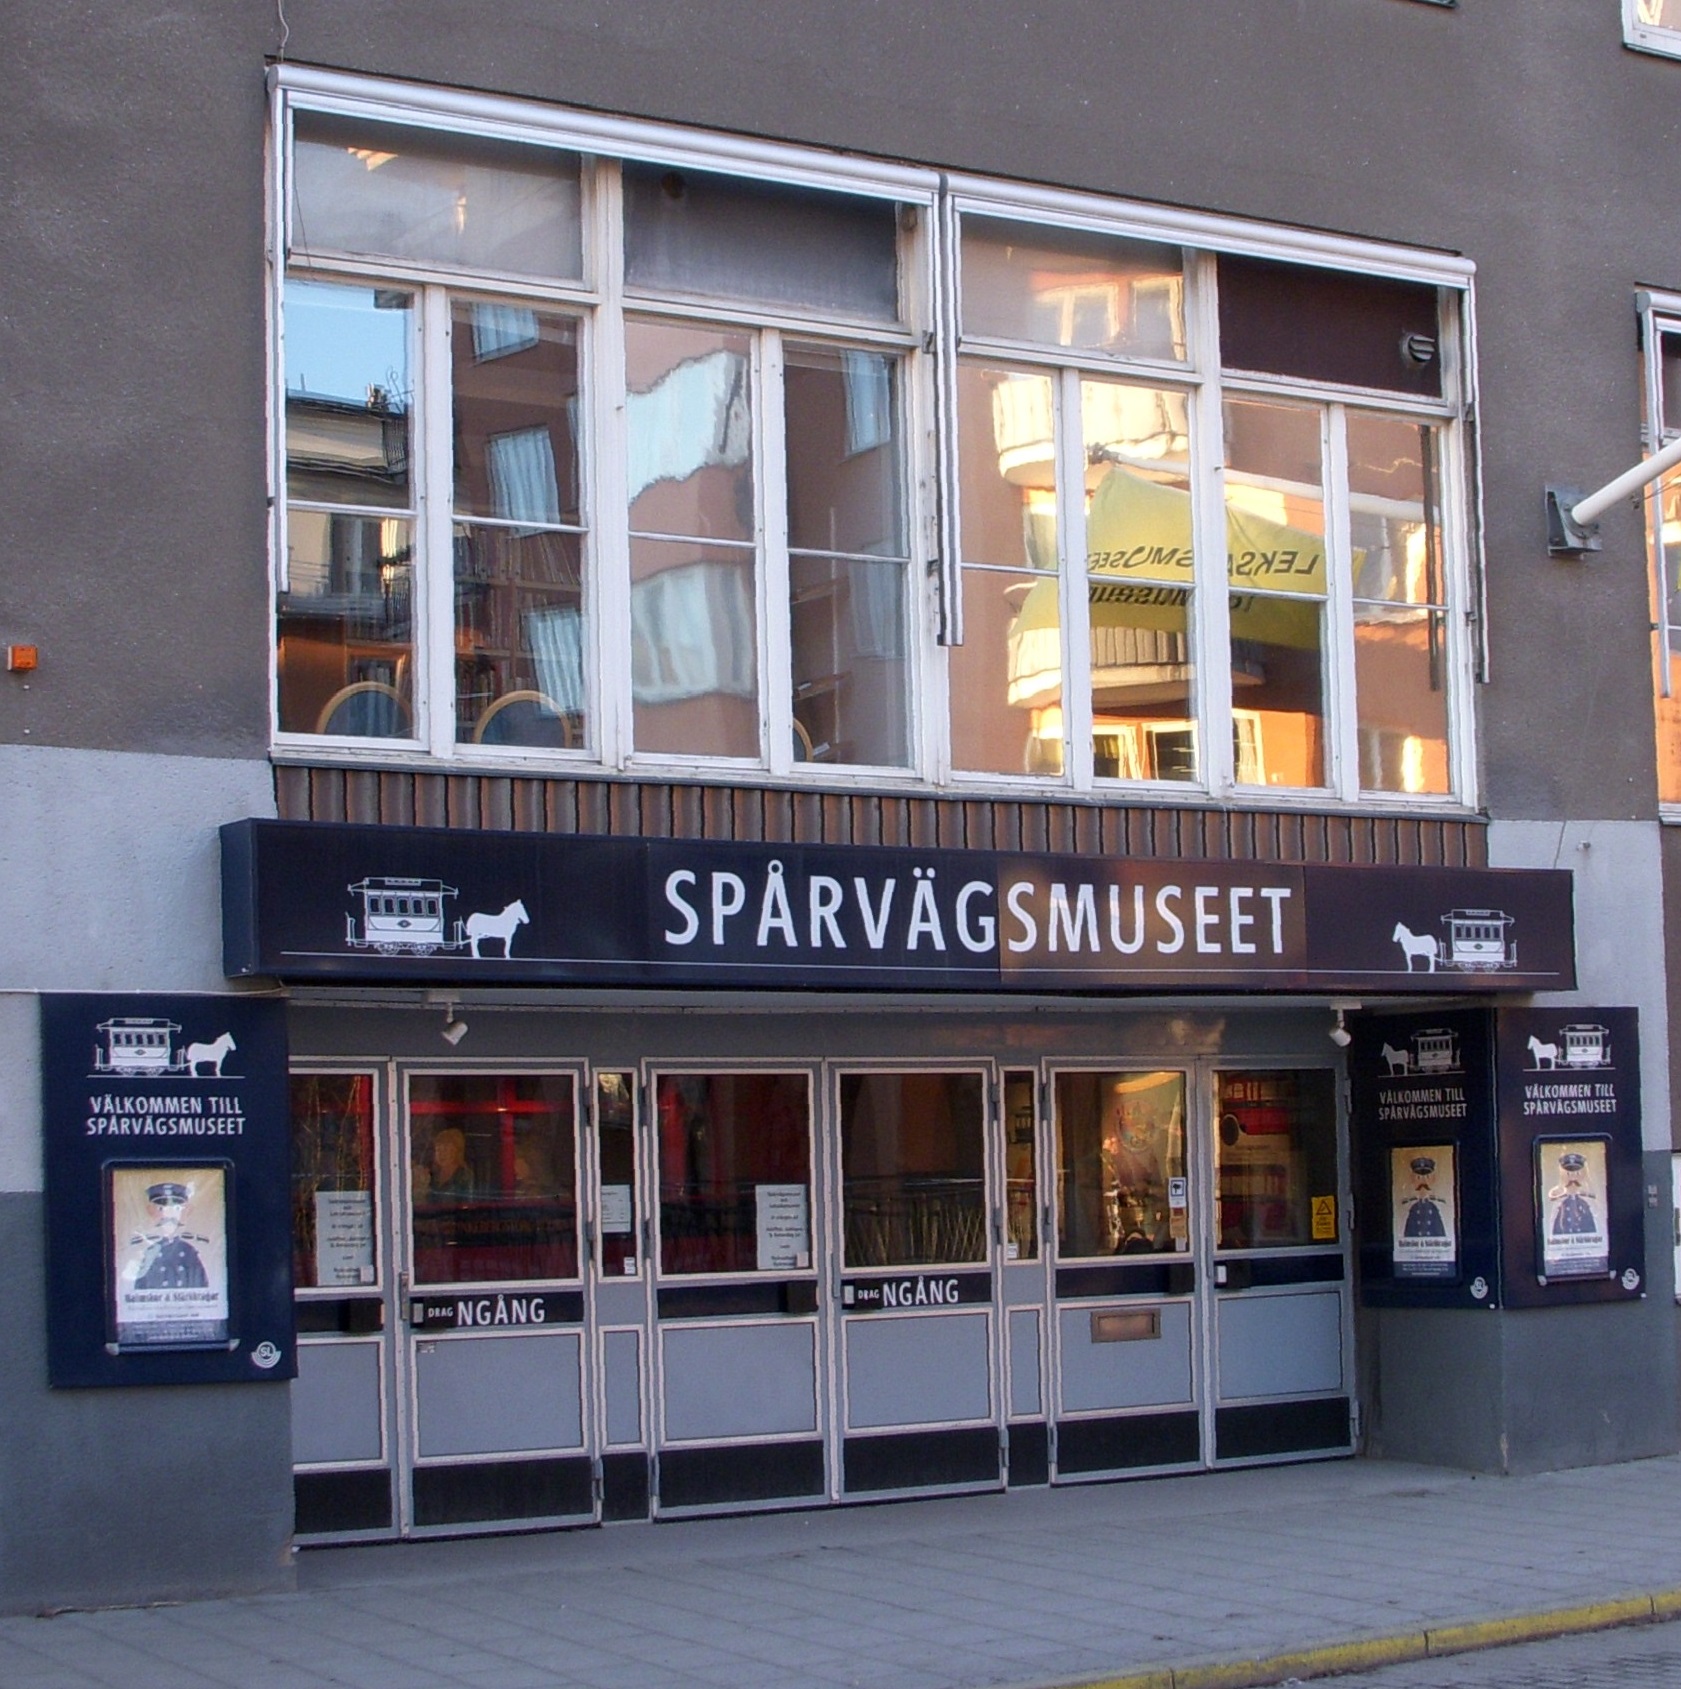 Stockholm Toy Museum